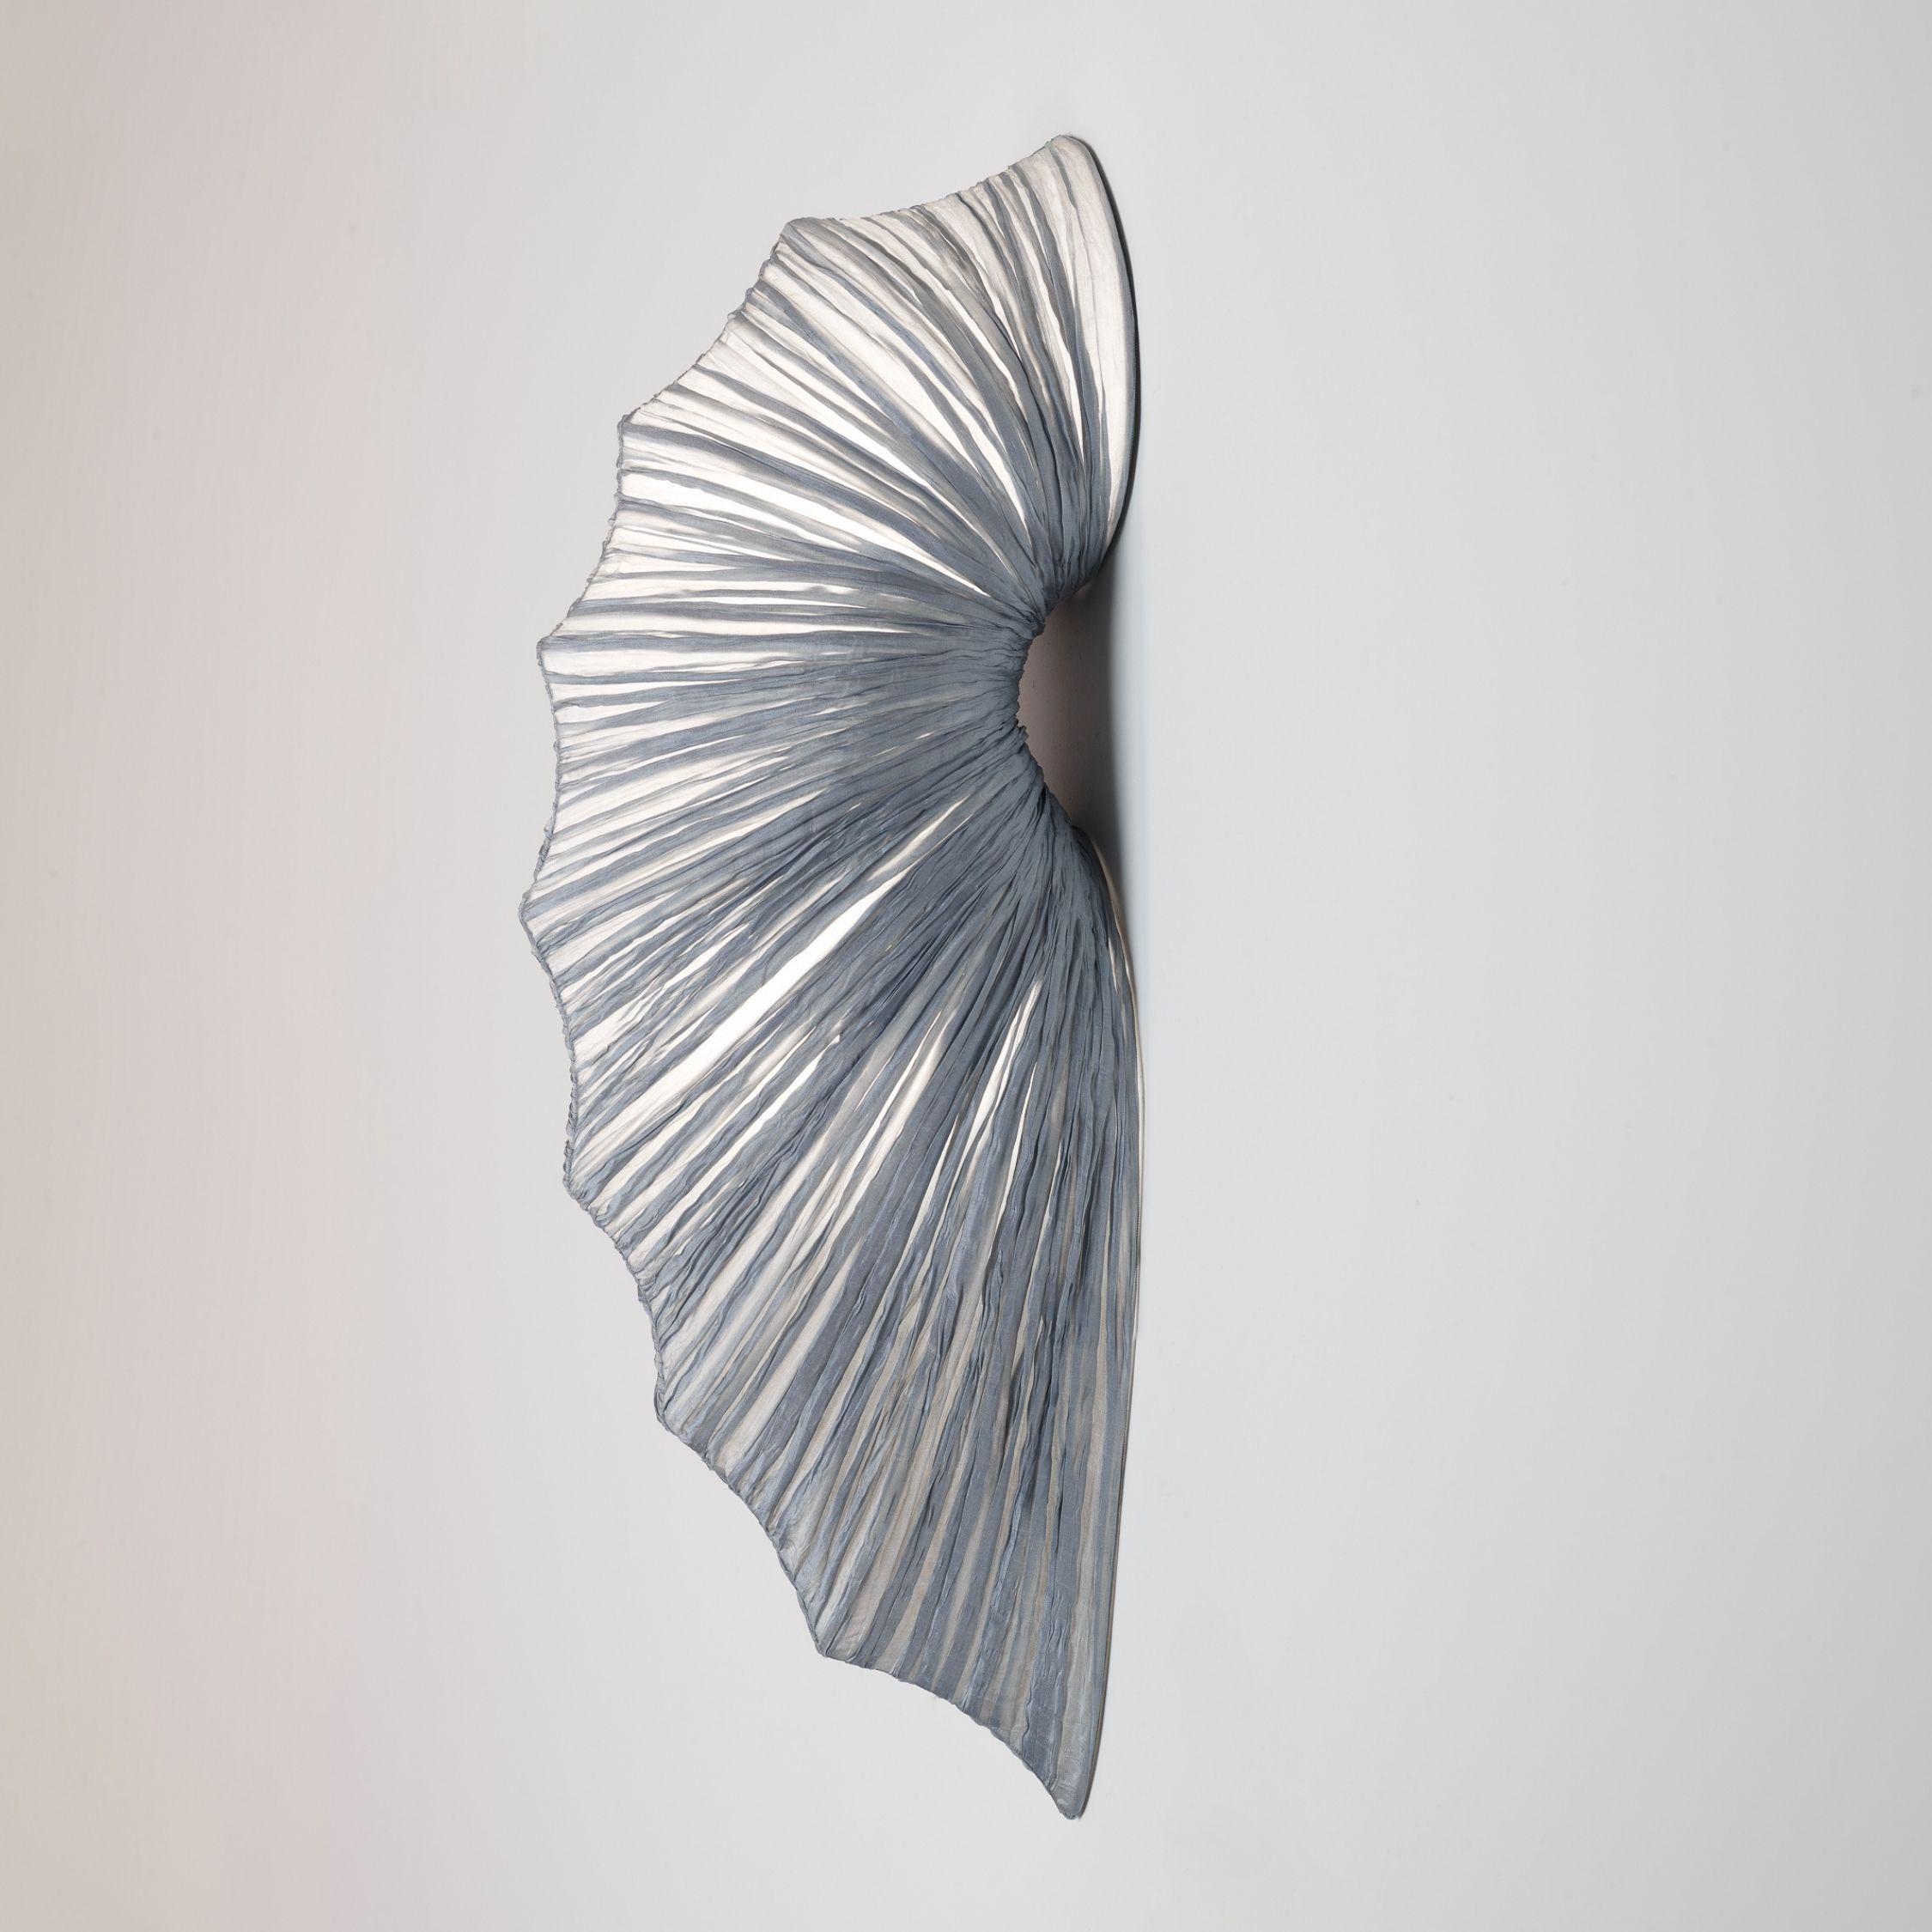 The Contrare's organic figure was inspired by natural forms as well as modern sculpture and architecture. The Contrare wall fixture adds a touch of sophistication to any interior. The Contrare Wall Light is part of the Orchestra Family, which takes